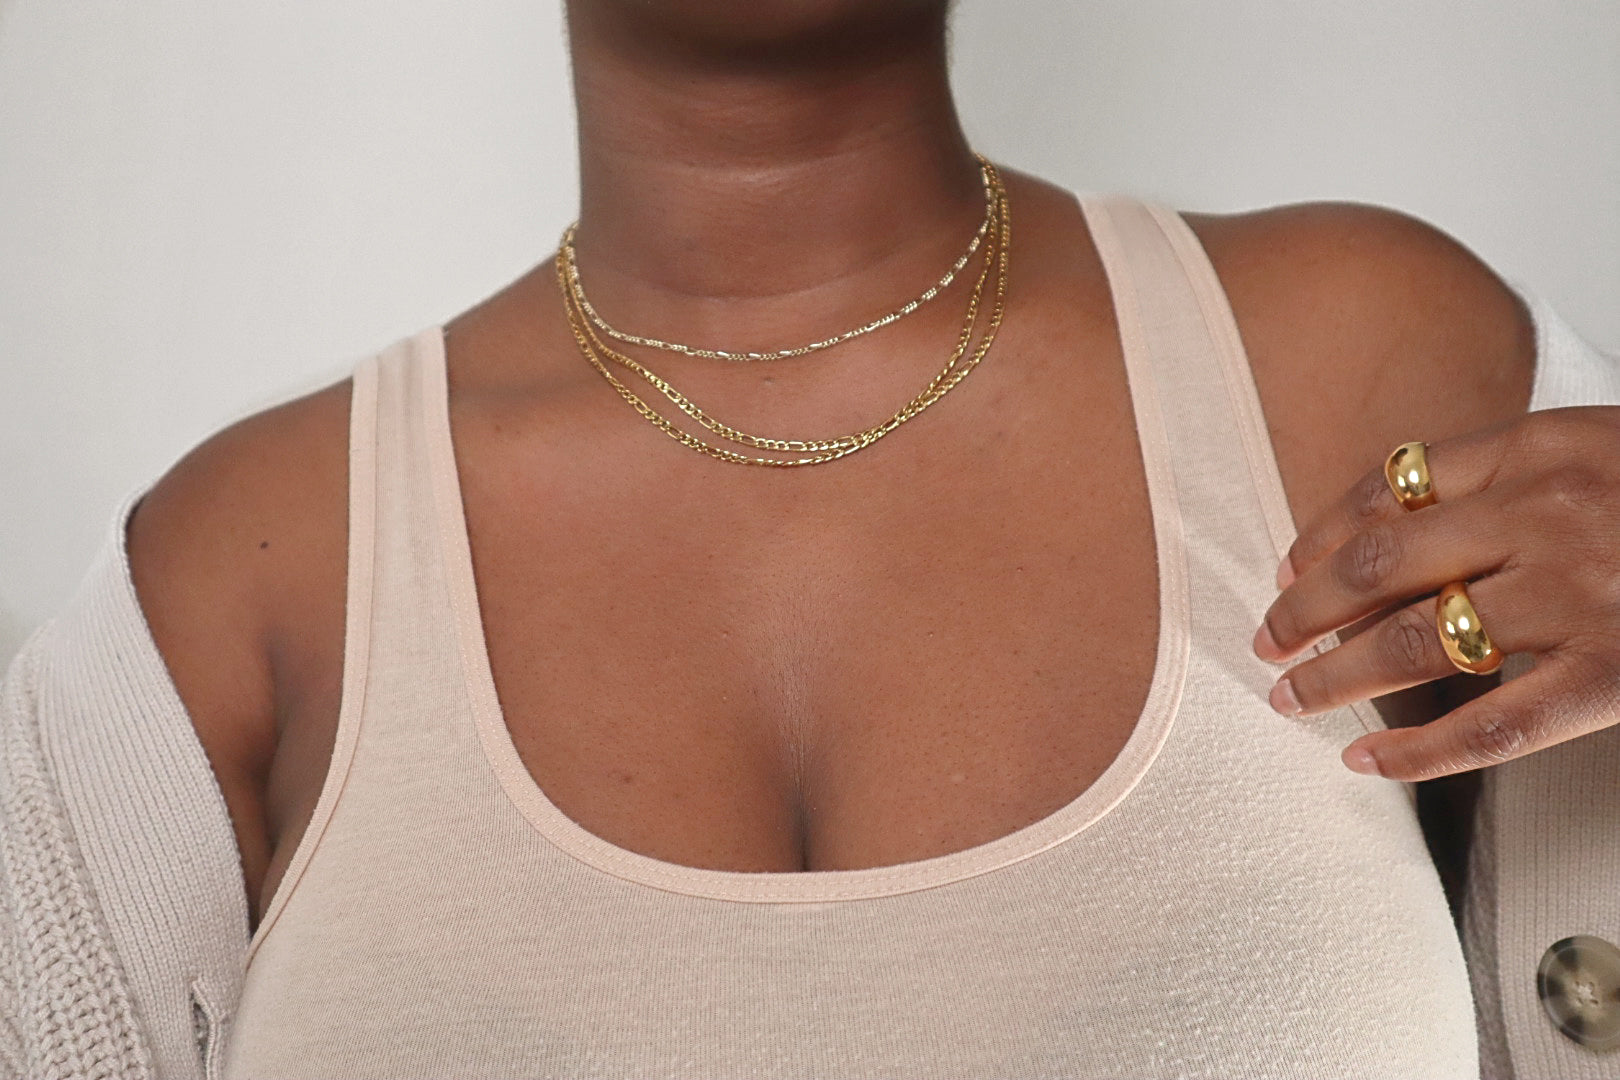 Figaro Chain 18k gold plated